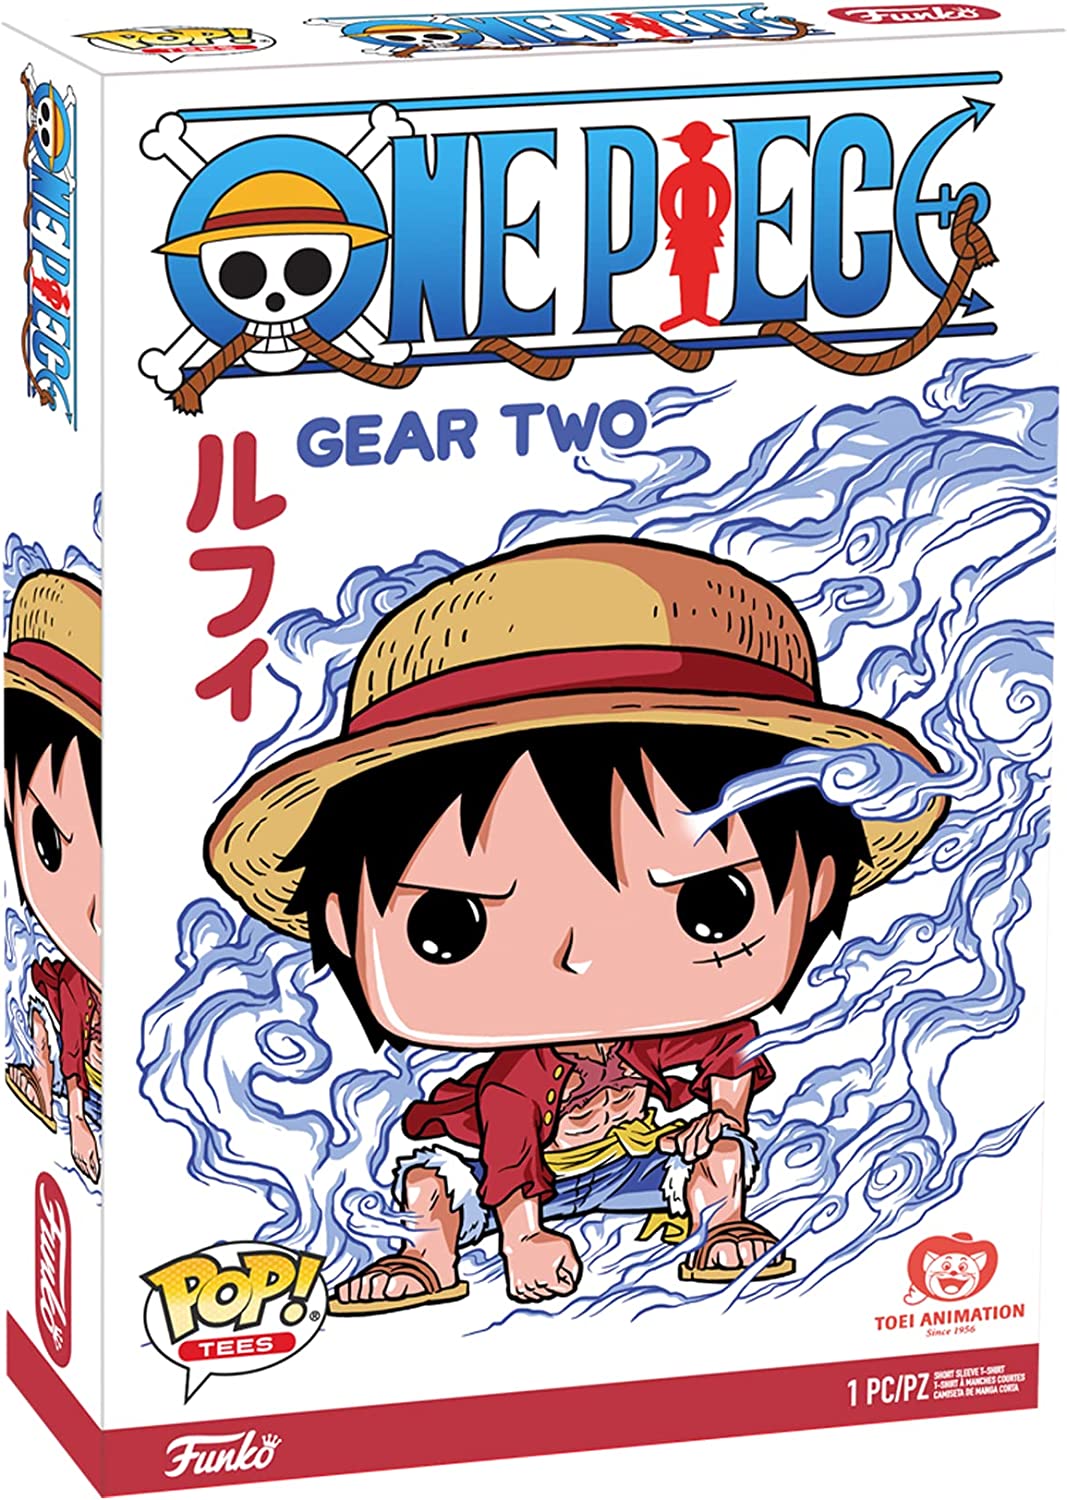 Funko Pop! Boxed Tee: One Piece - Luffy Gear Two